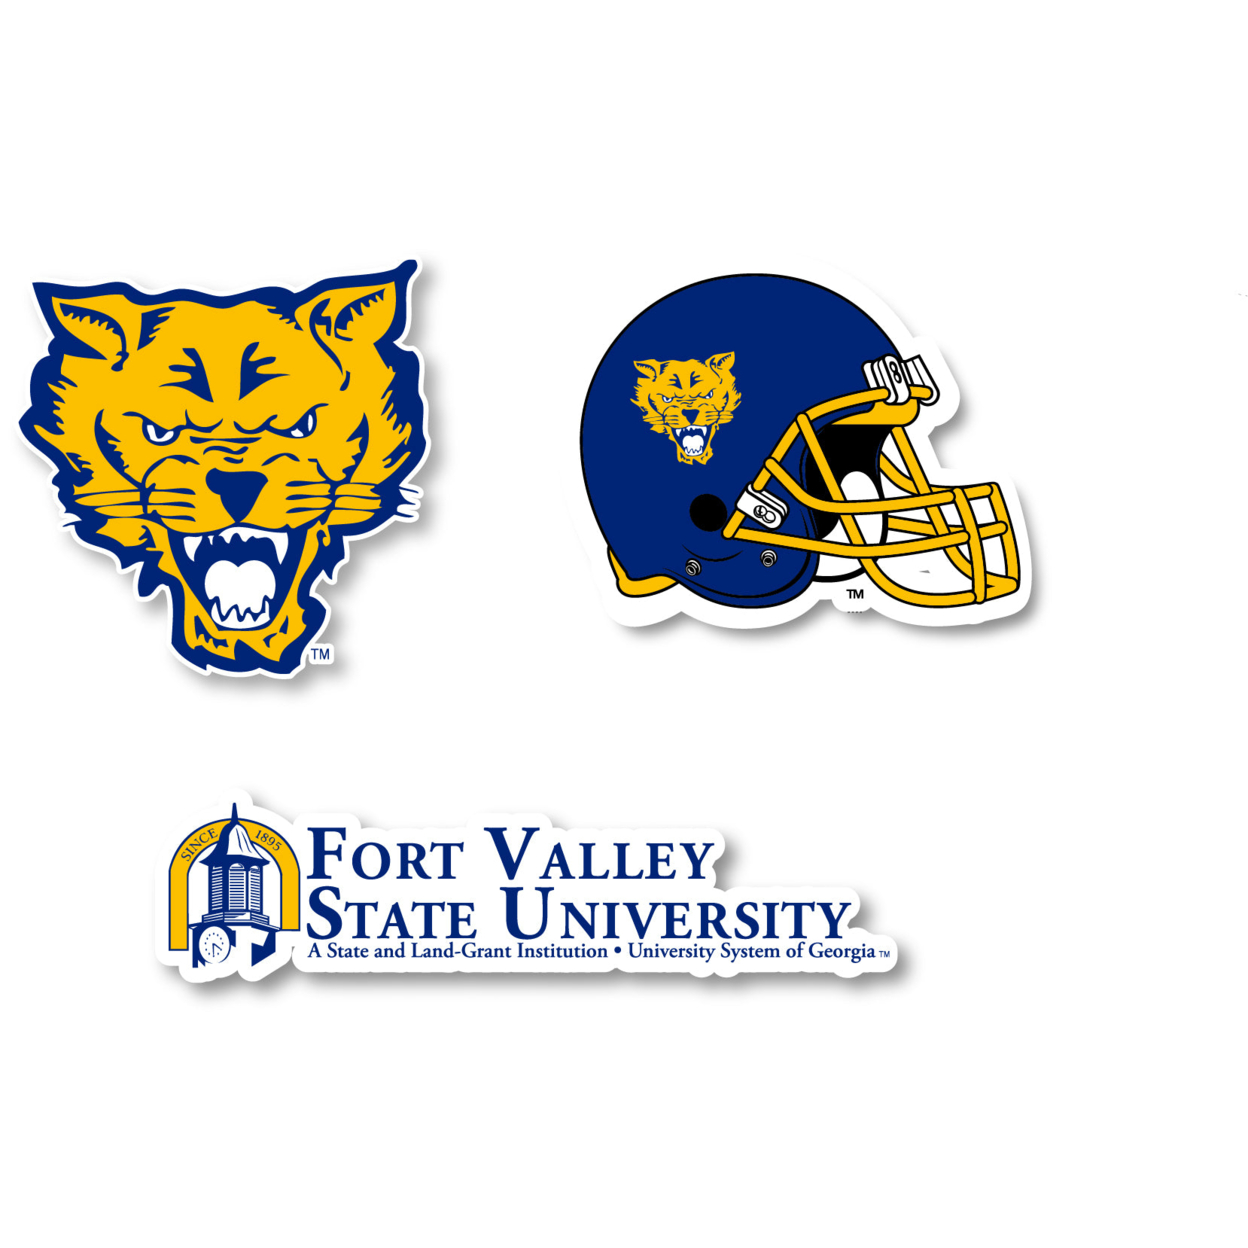 Fort Valley State University Vinyl Decal Sticker 3 Pack 4-Inch Each